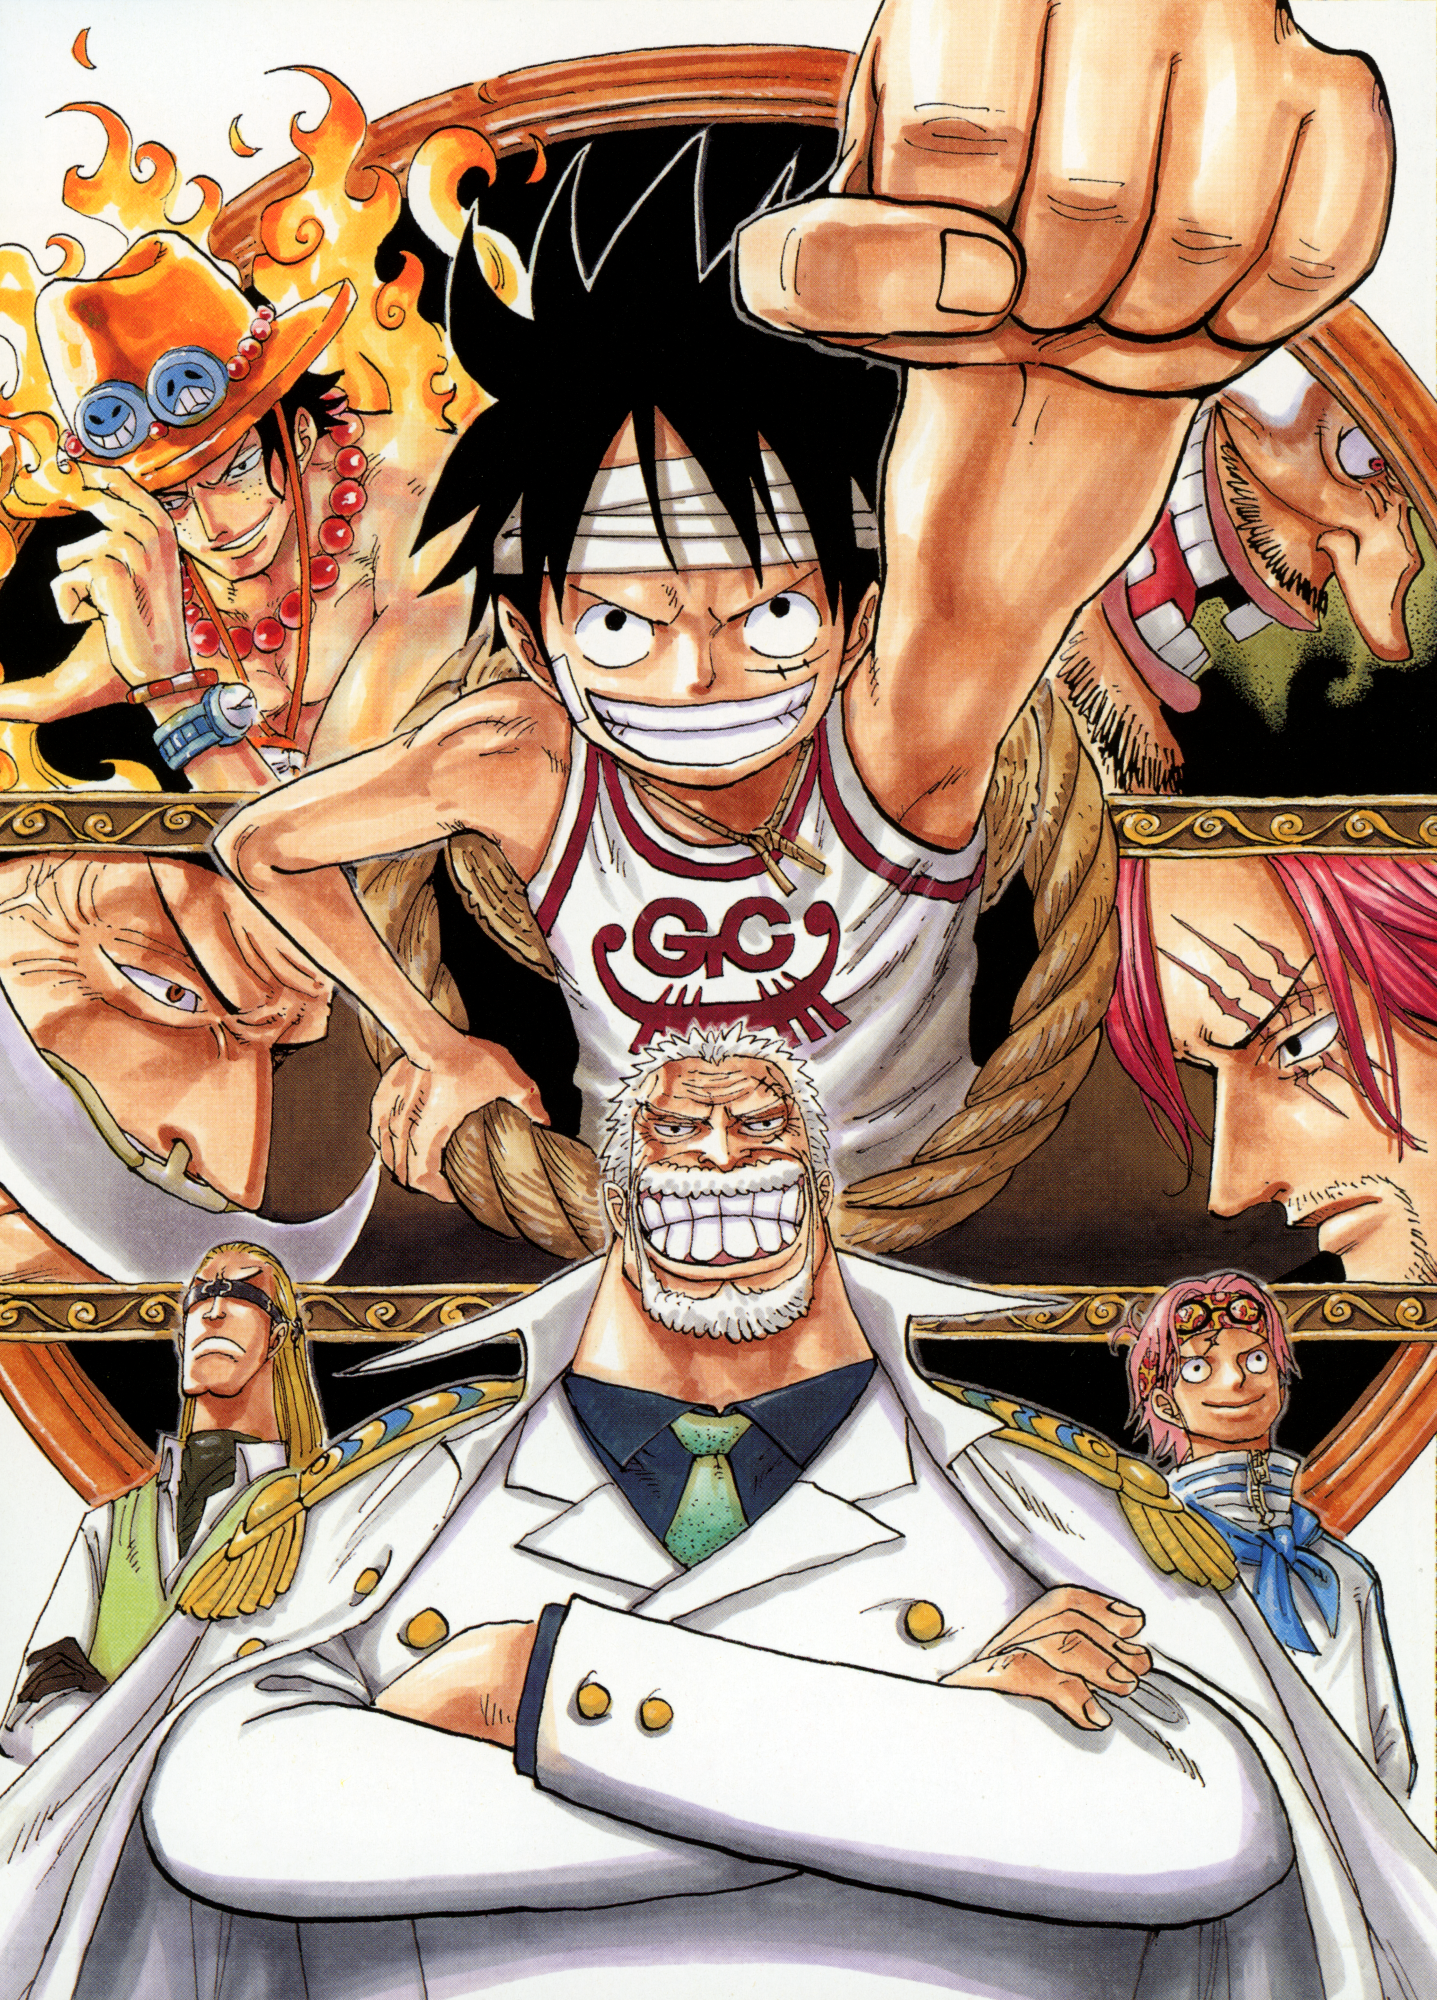 Watch One Piece Episode of East blue - Luffy and His Four Crewmates' Great  Adventure